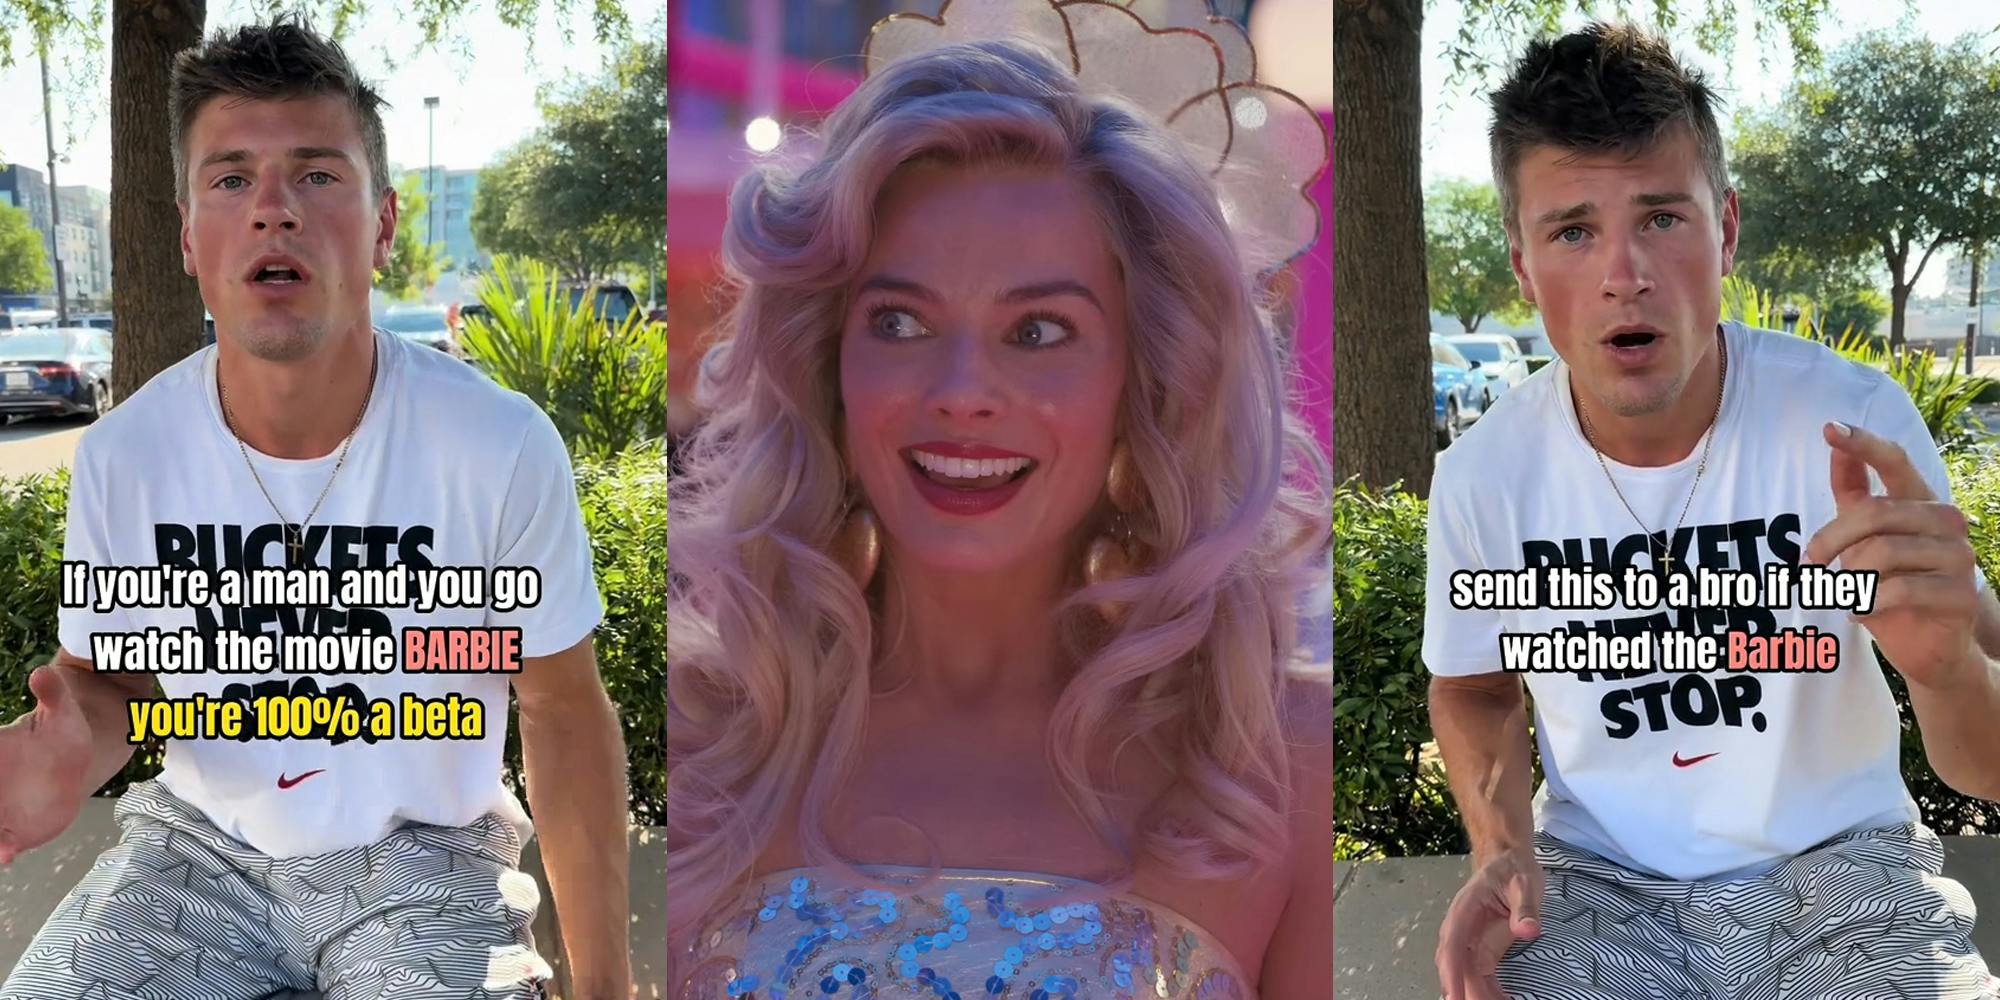 man speaking outside with caption "If you're a man and you go watch the movie BARBIE you're 100% a beta" (l) Margot Robbie as Barbie in Barbie (c) man speaking outside with caption "send this to a bro if they watched Barbie" (r)